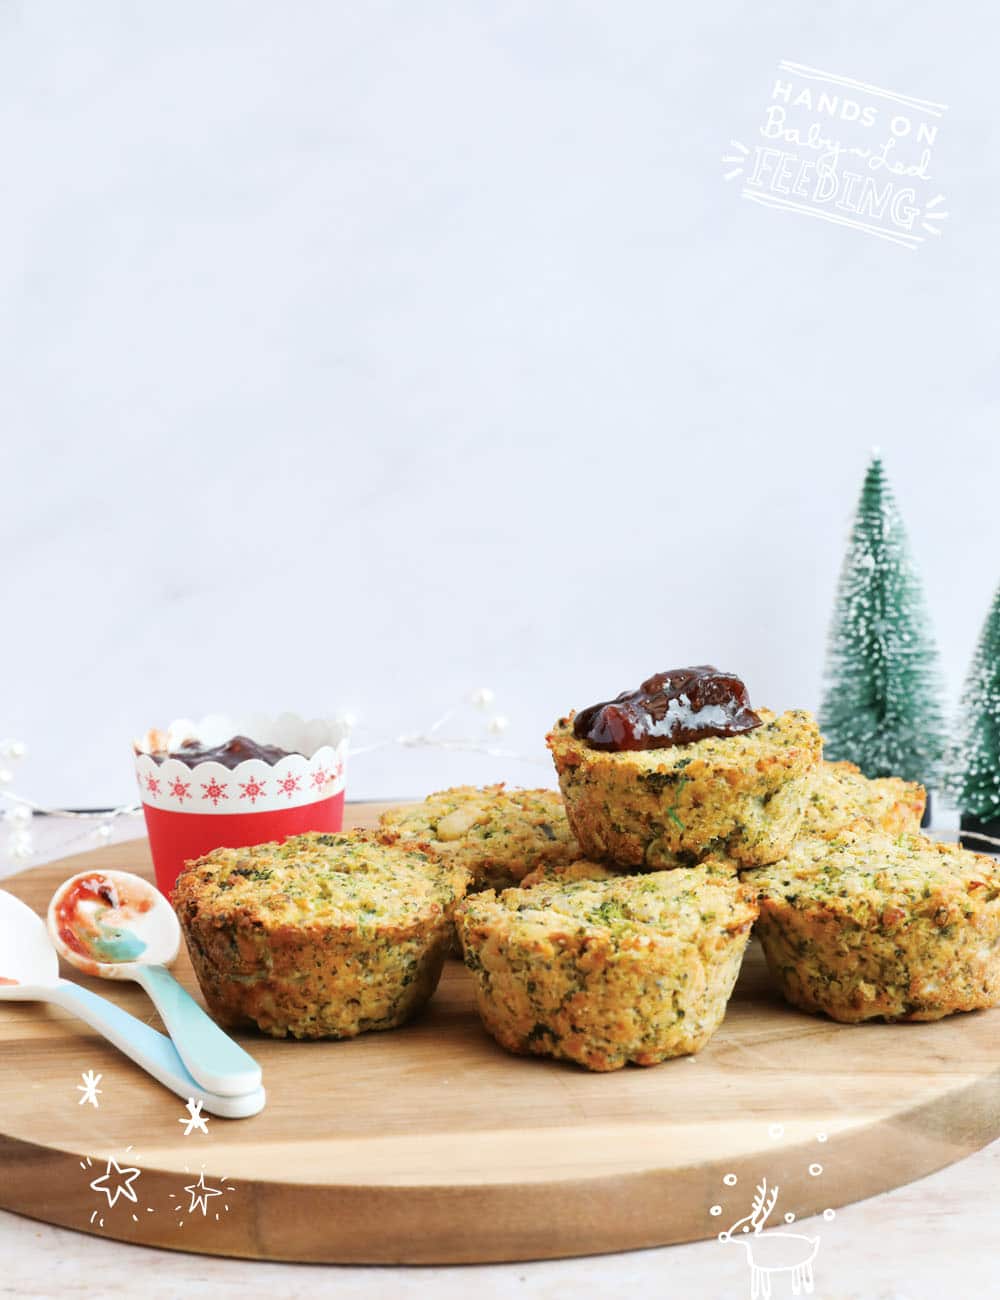 Wholegrain Turkey Stuffing Muffins make a healthy leftover recipe that is easy and freezer friendly. Served with a dollop of cranberry sauce, the little muffins are a healthy finger food the entire family can enjoy. They make healthy appetizers too! #leftovers #holidayrecipe #turkeyrecipe #babyledweaning #babyledfeeding #christmasrecipe